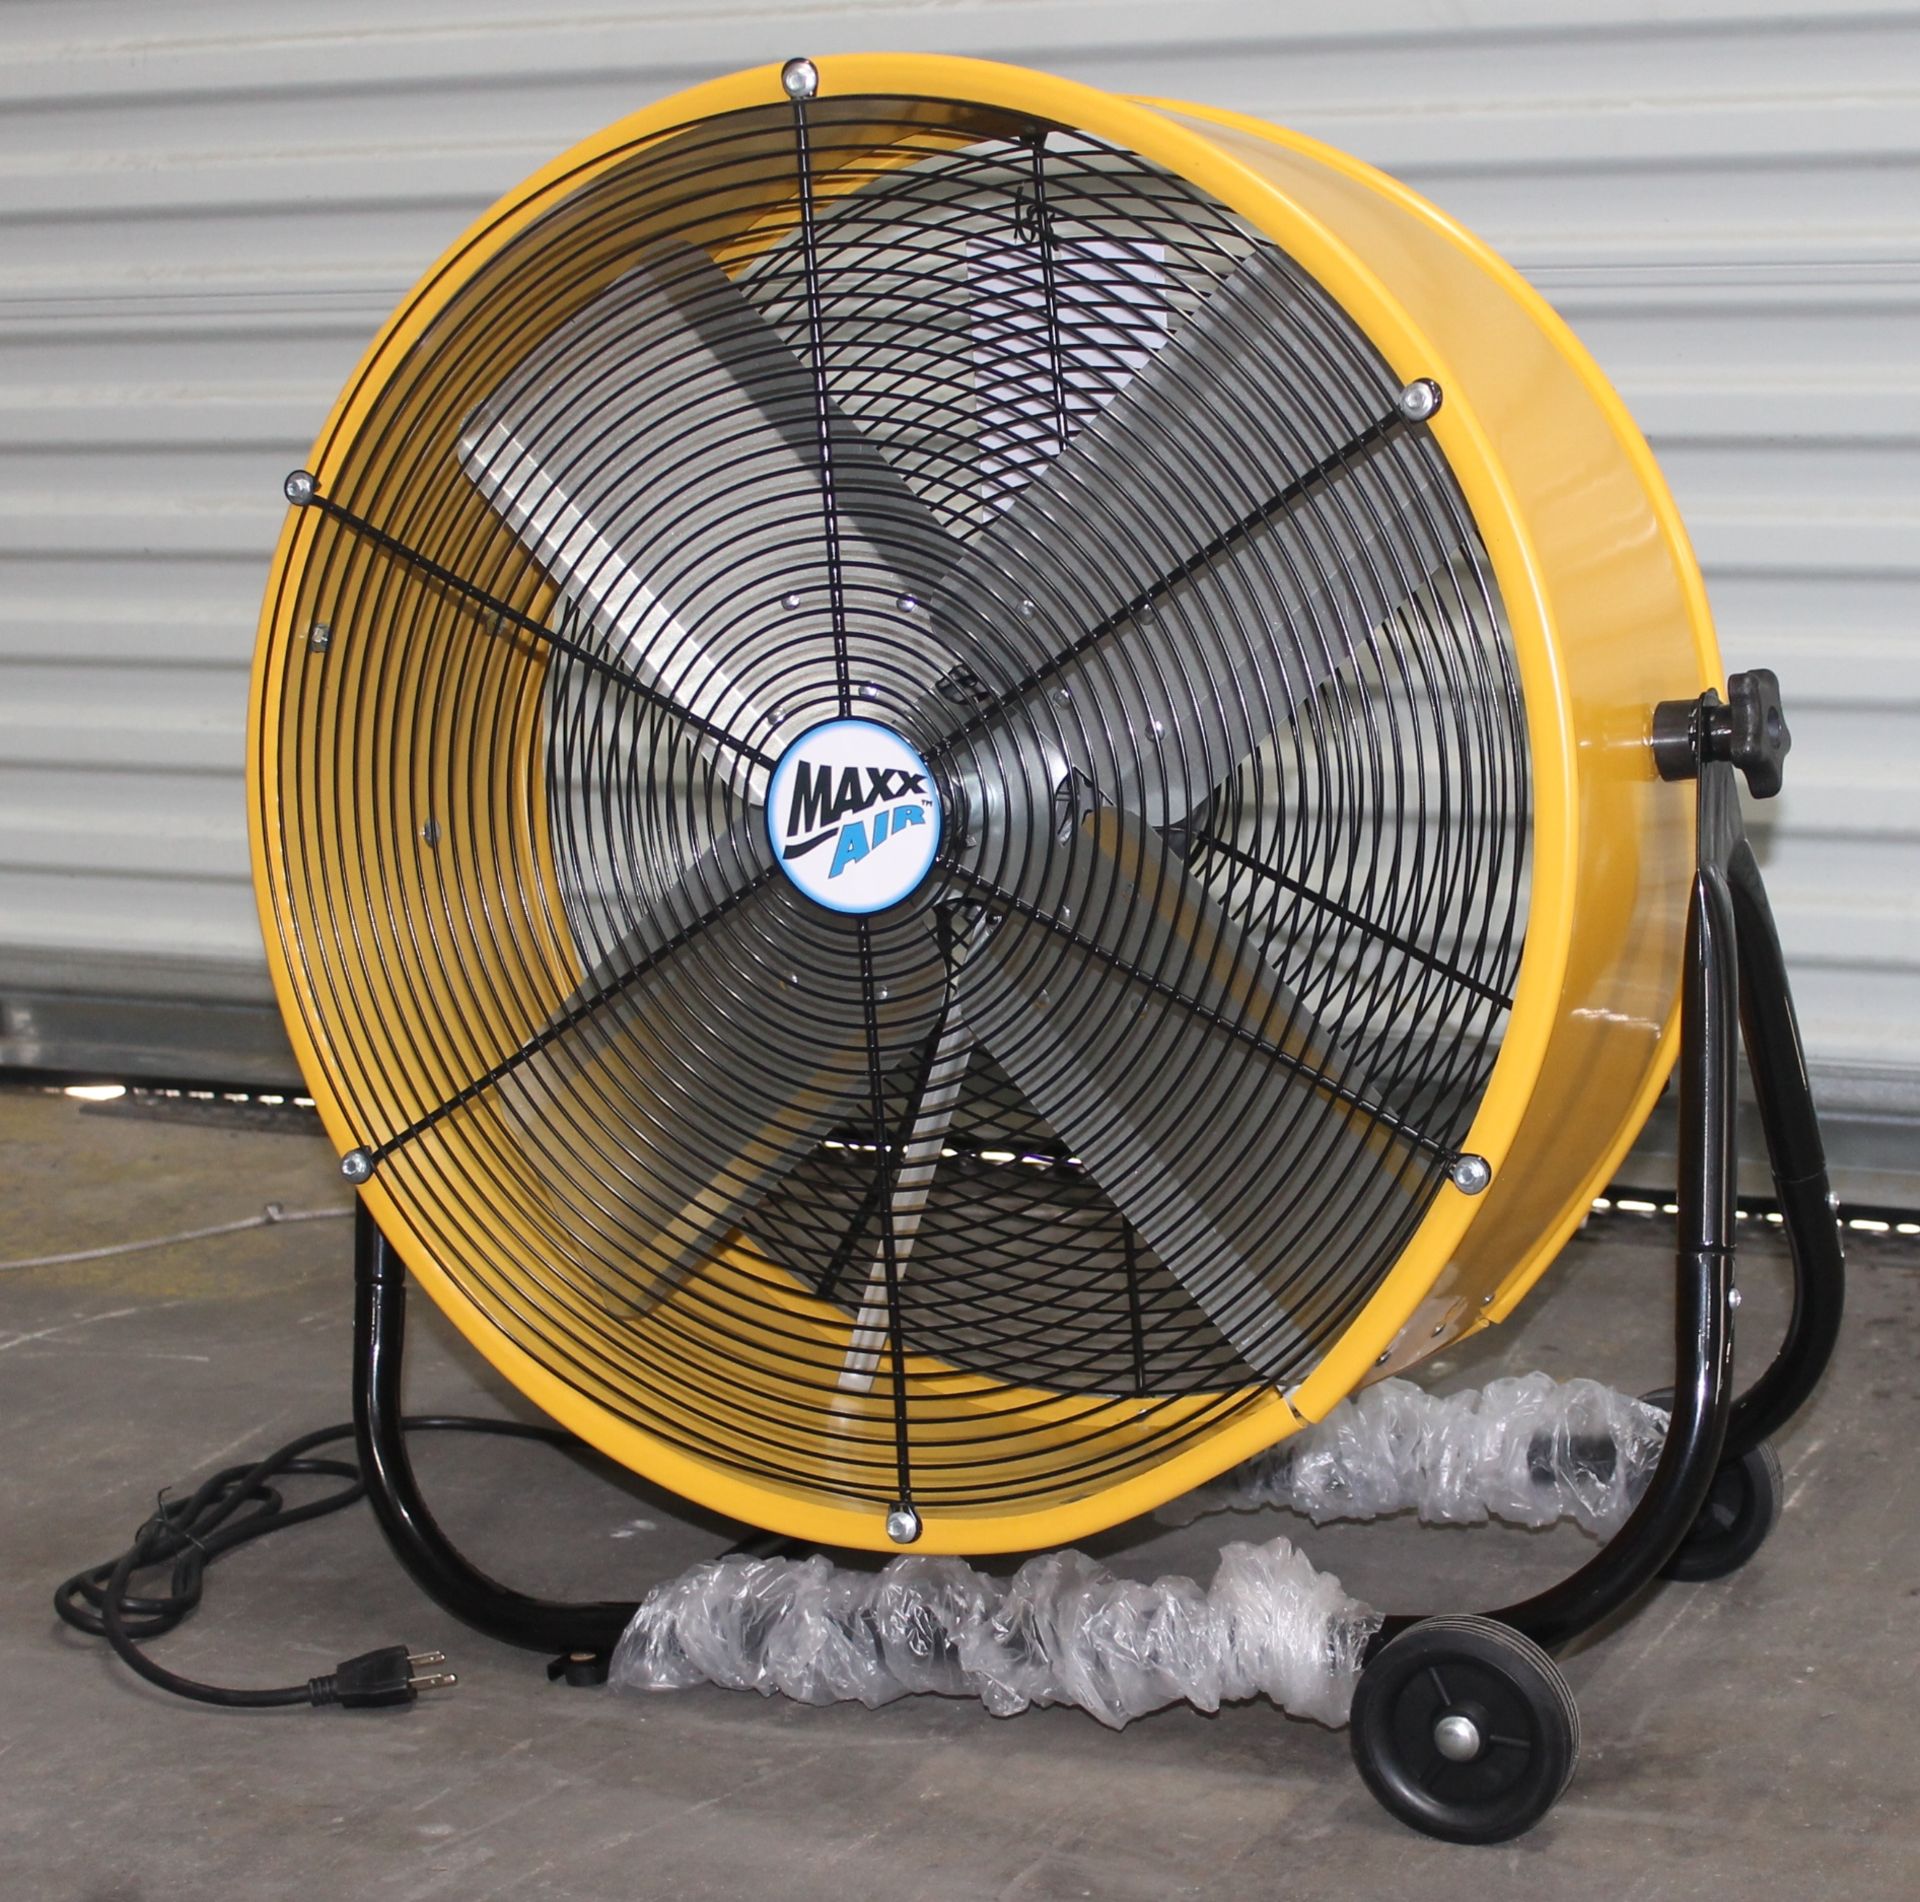 MAX AIR 24" PORTABLE FAN - Image 2 of 2